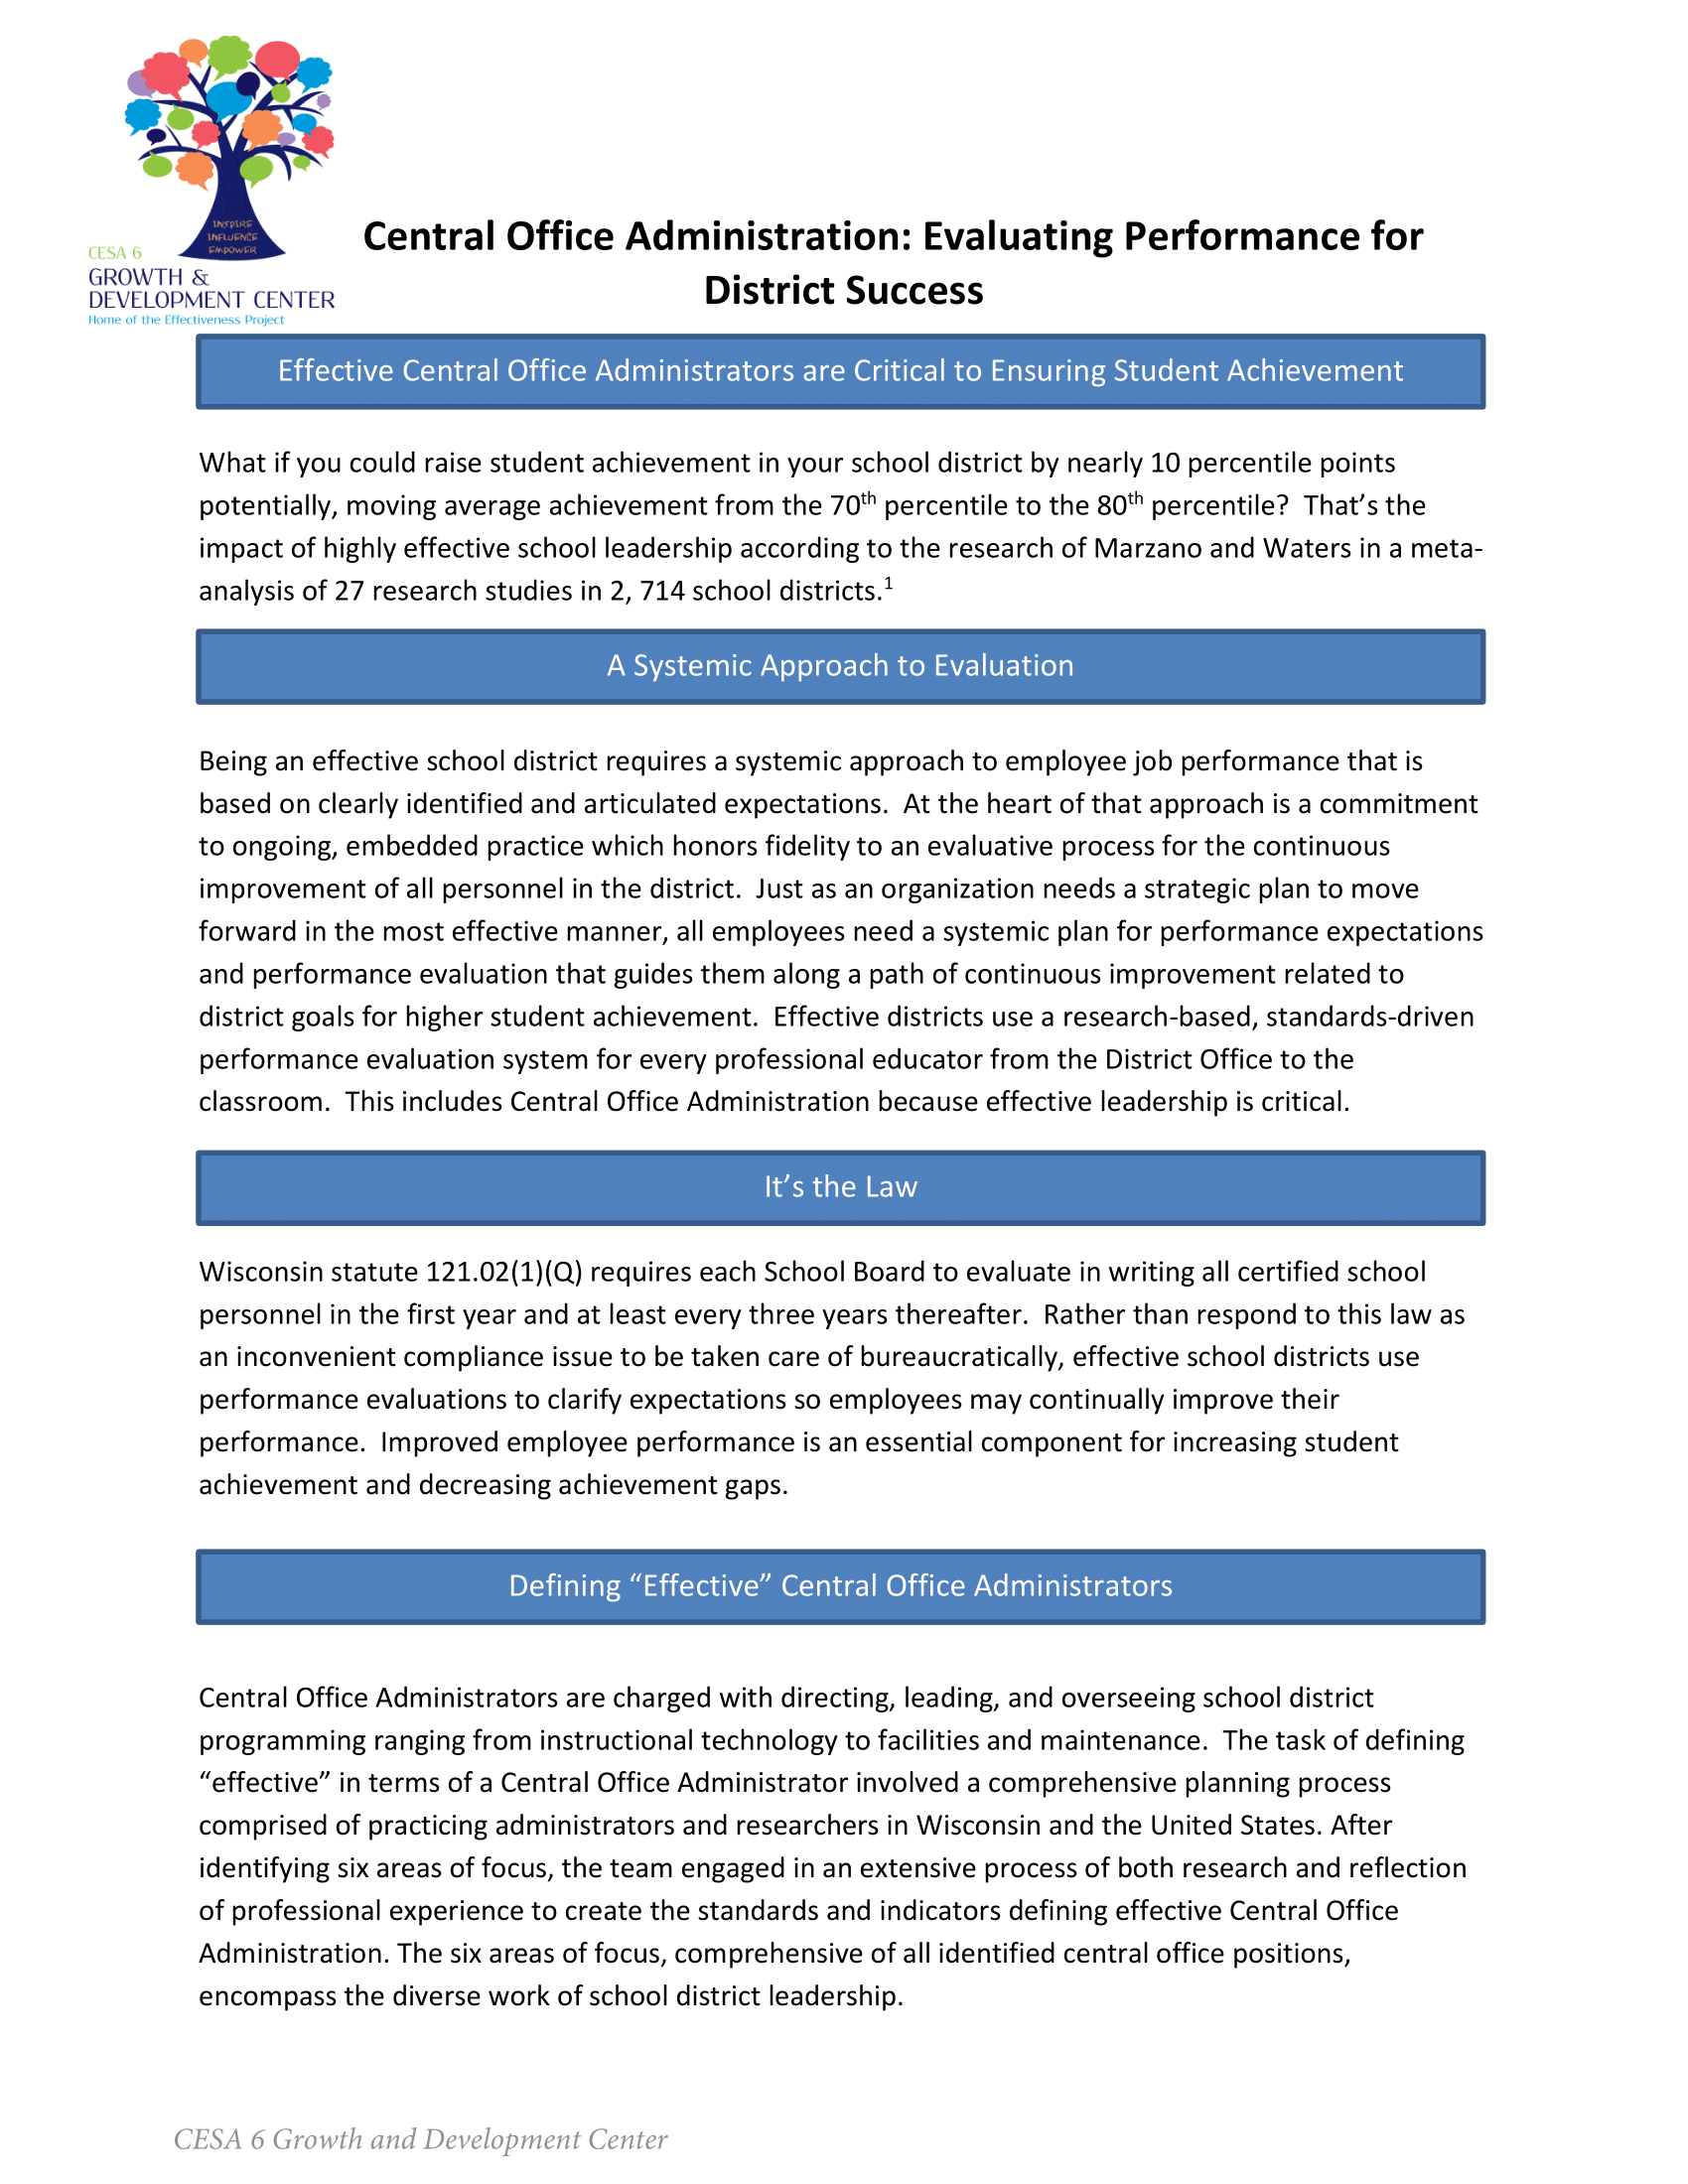 COPES_Whitepaper_1-4-18-1.png